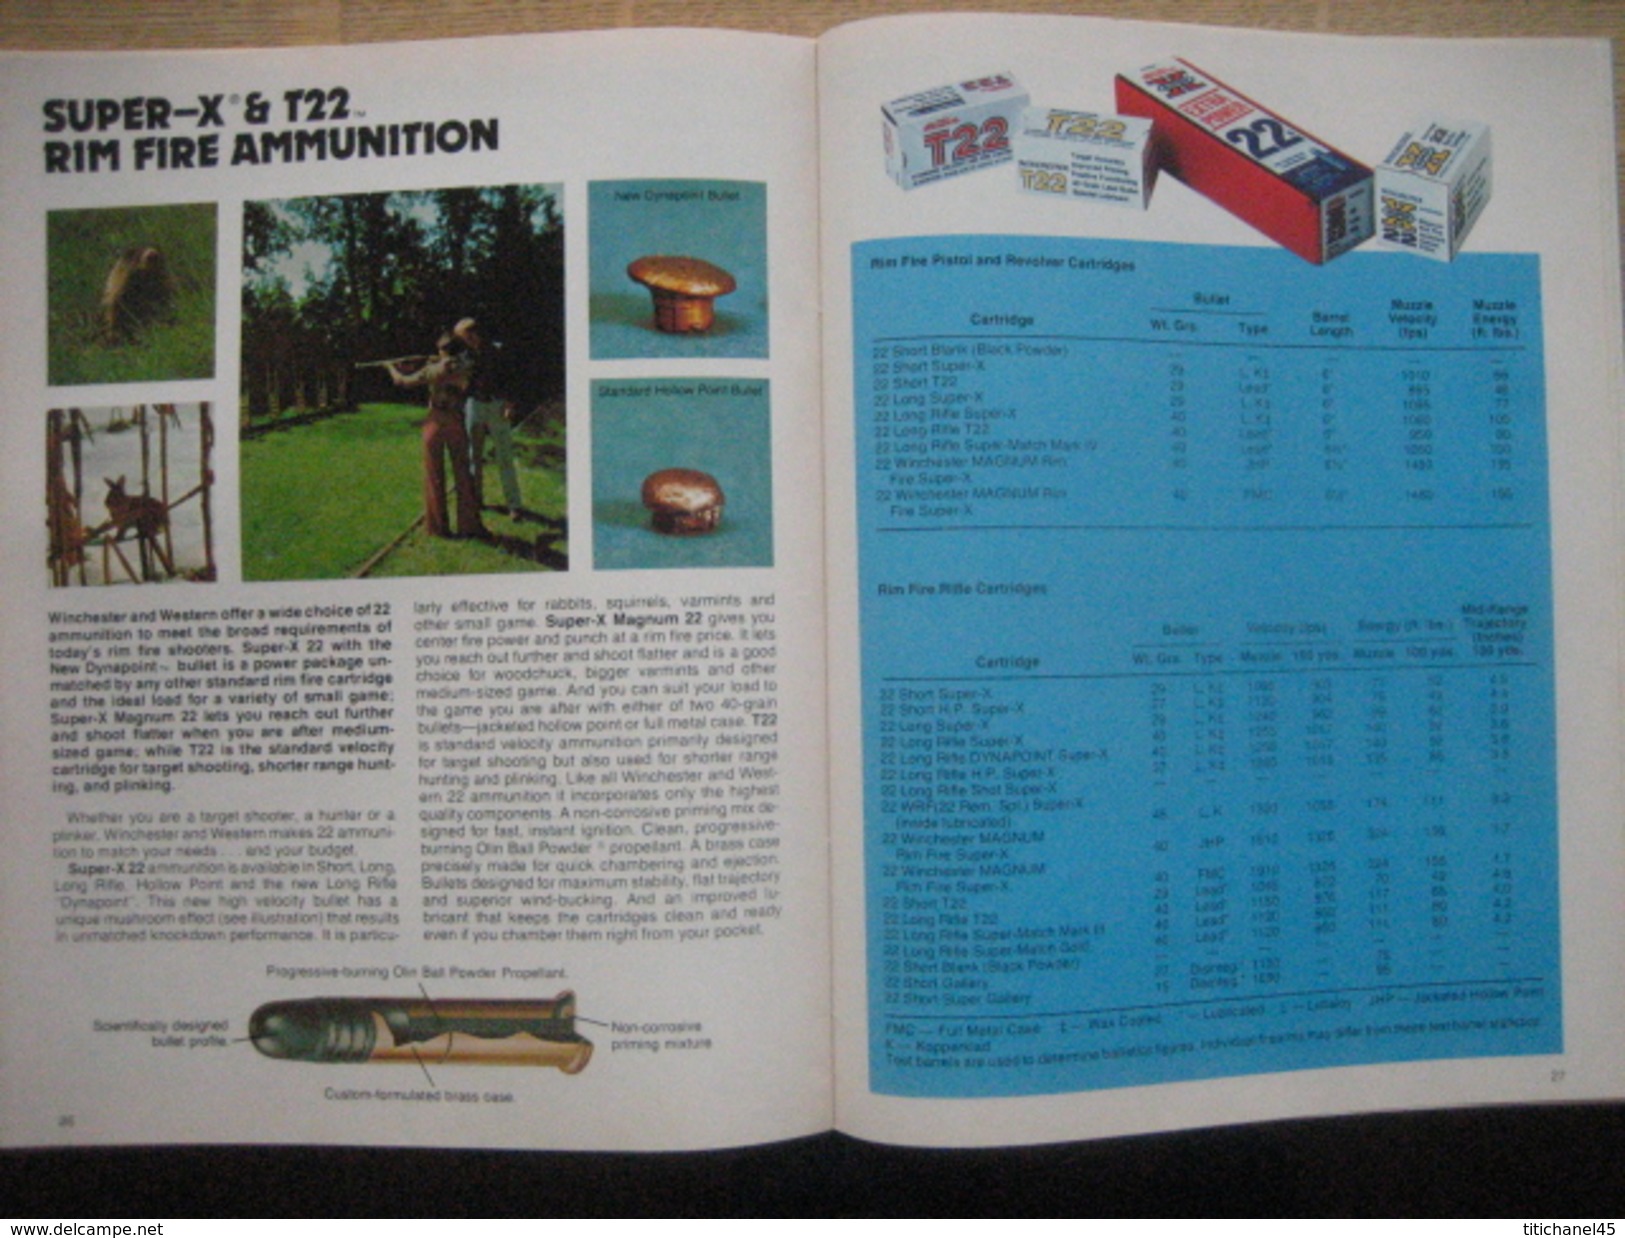 ARMES - MUNITIONS - Original 1976 WINCHESTER-WESTERN sporting firearms and ammunition catalog 40 pages